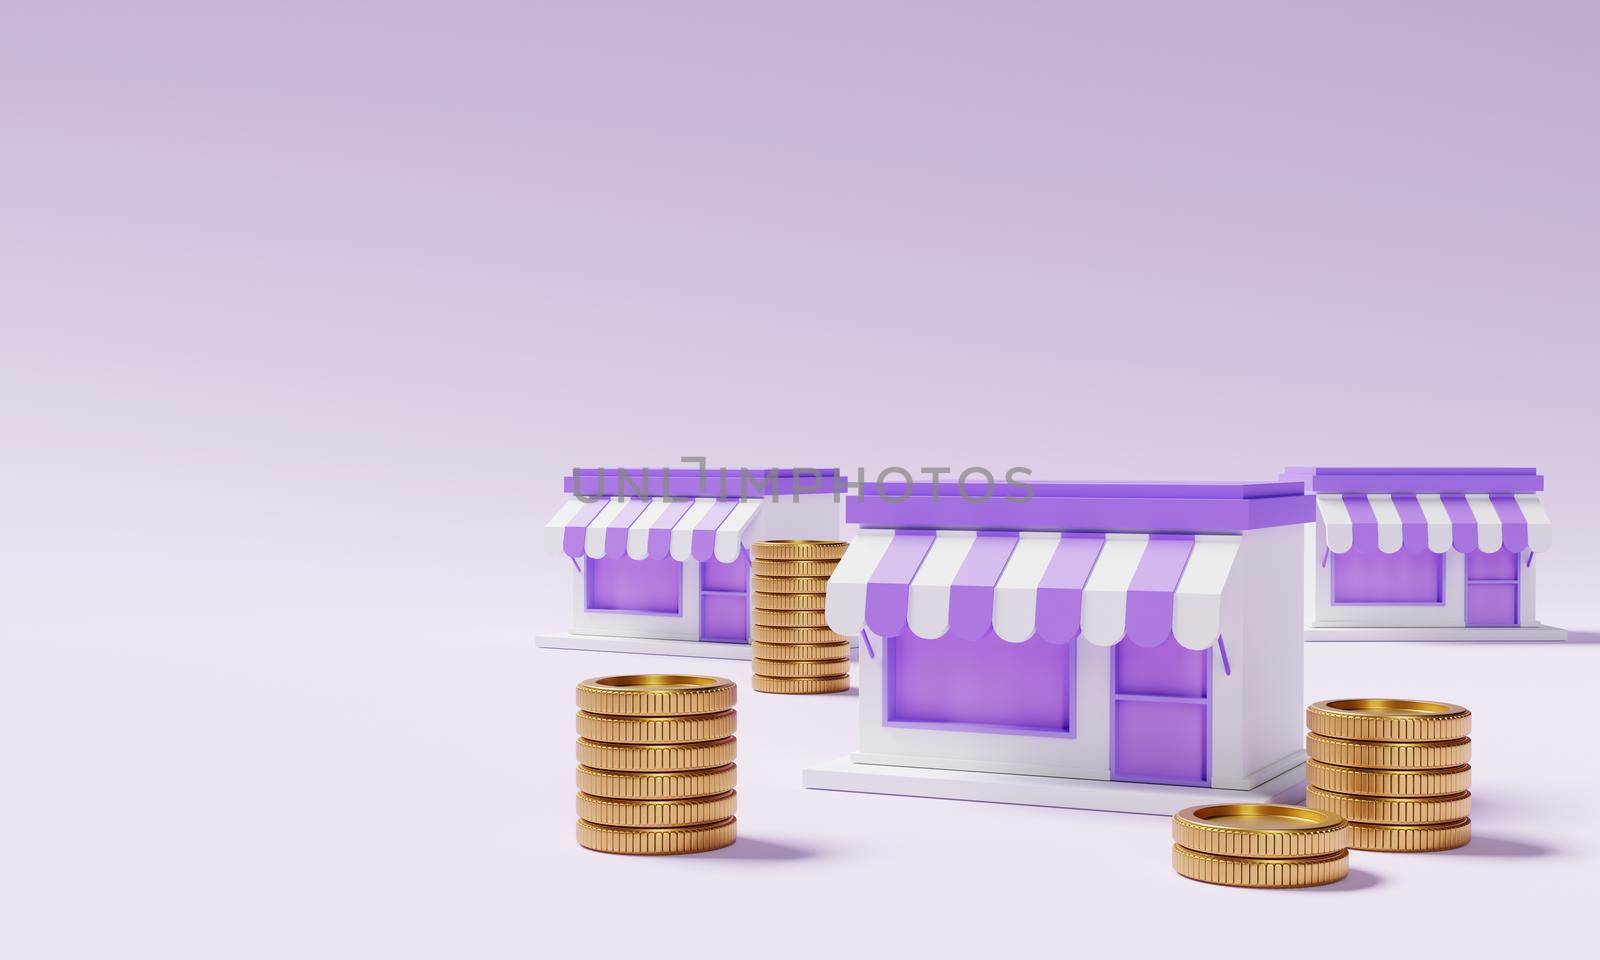 Supermarket store with stacking golden coins on purple background. Financial and economic concept. 3D illustration rendering by MiniStocker